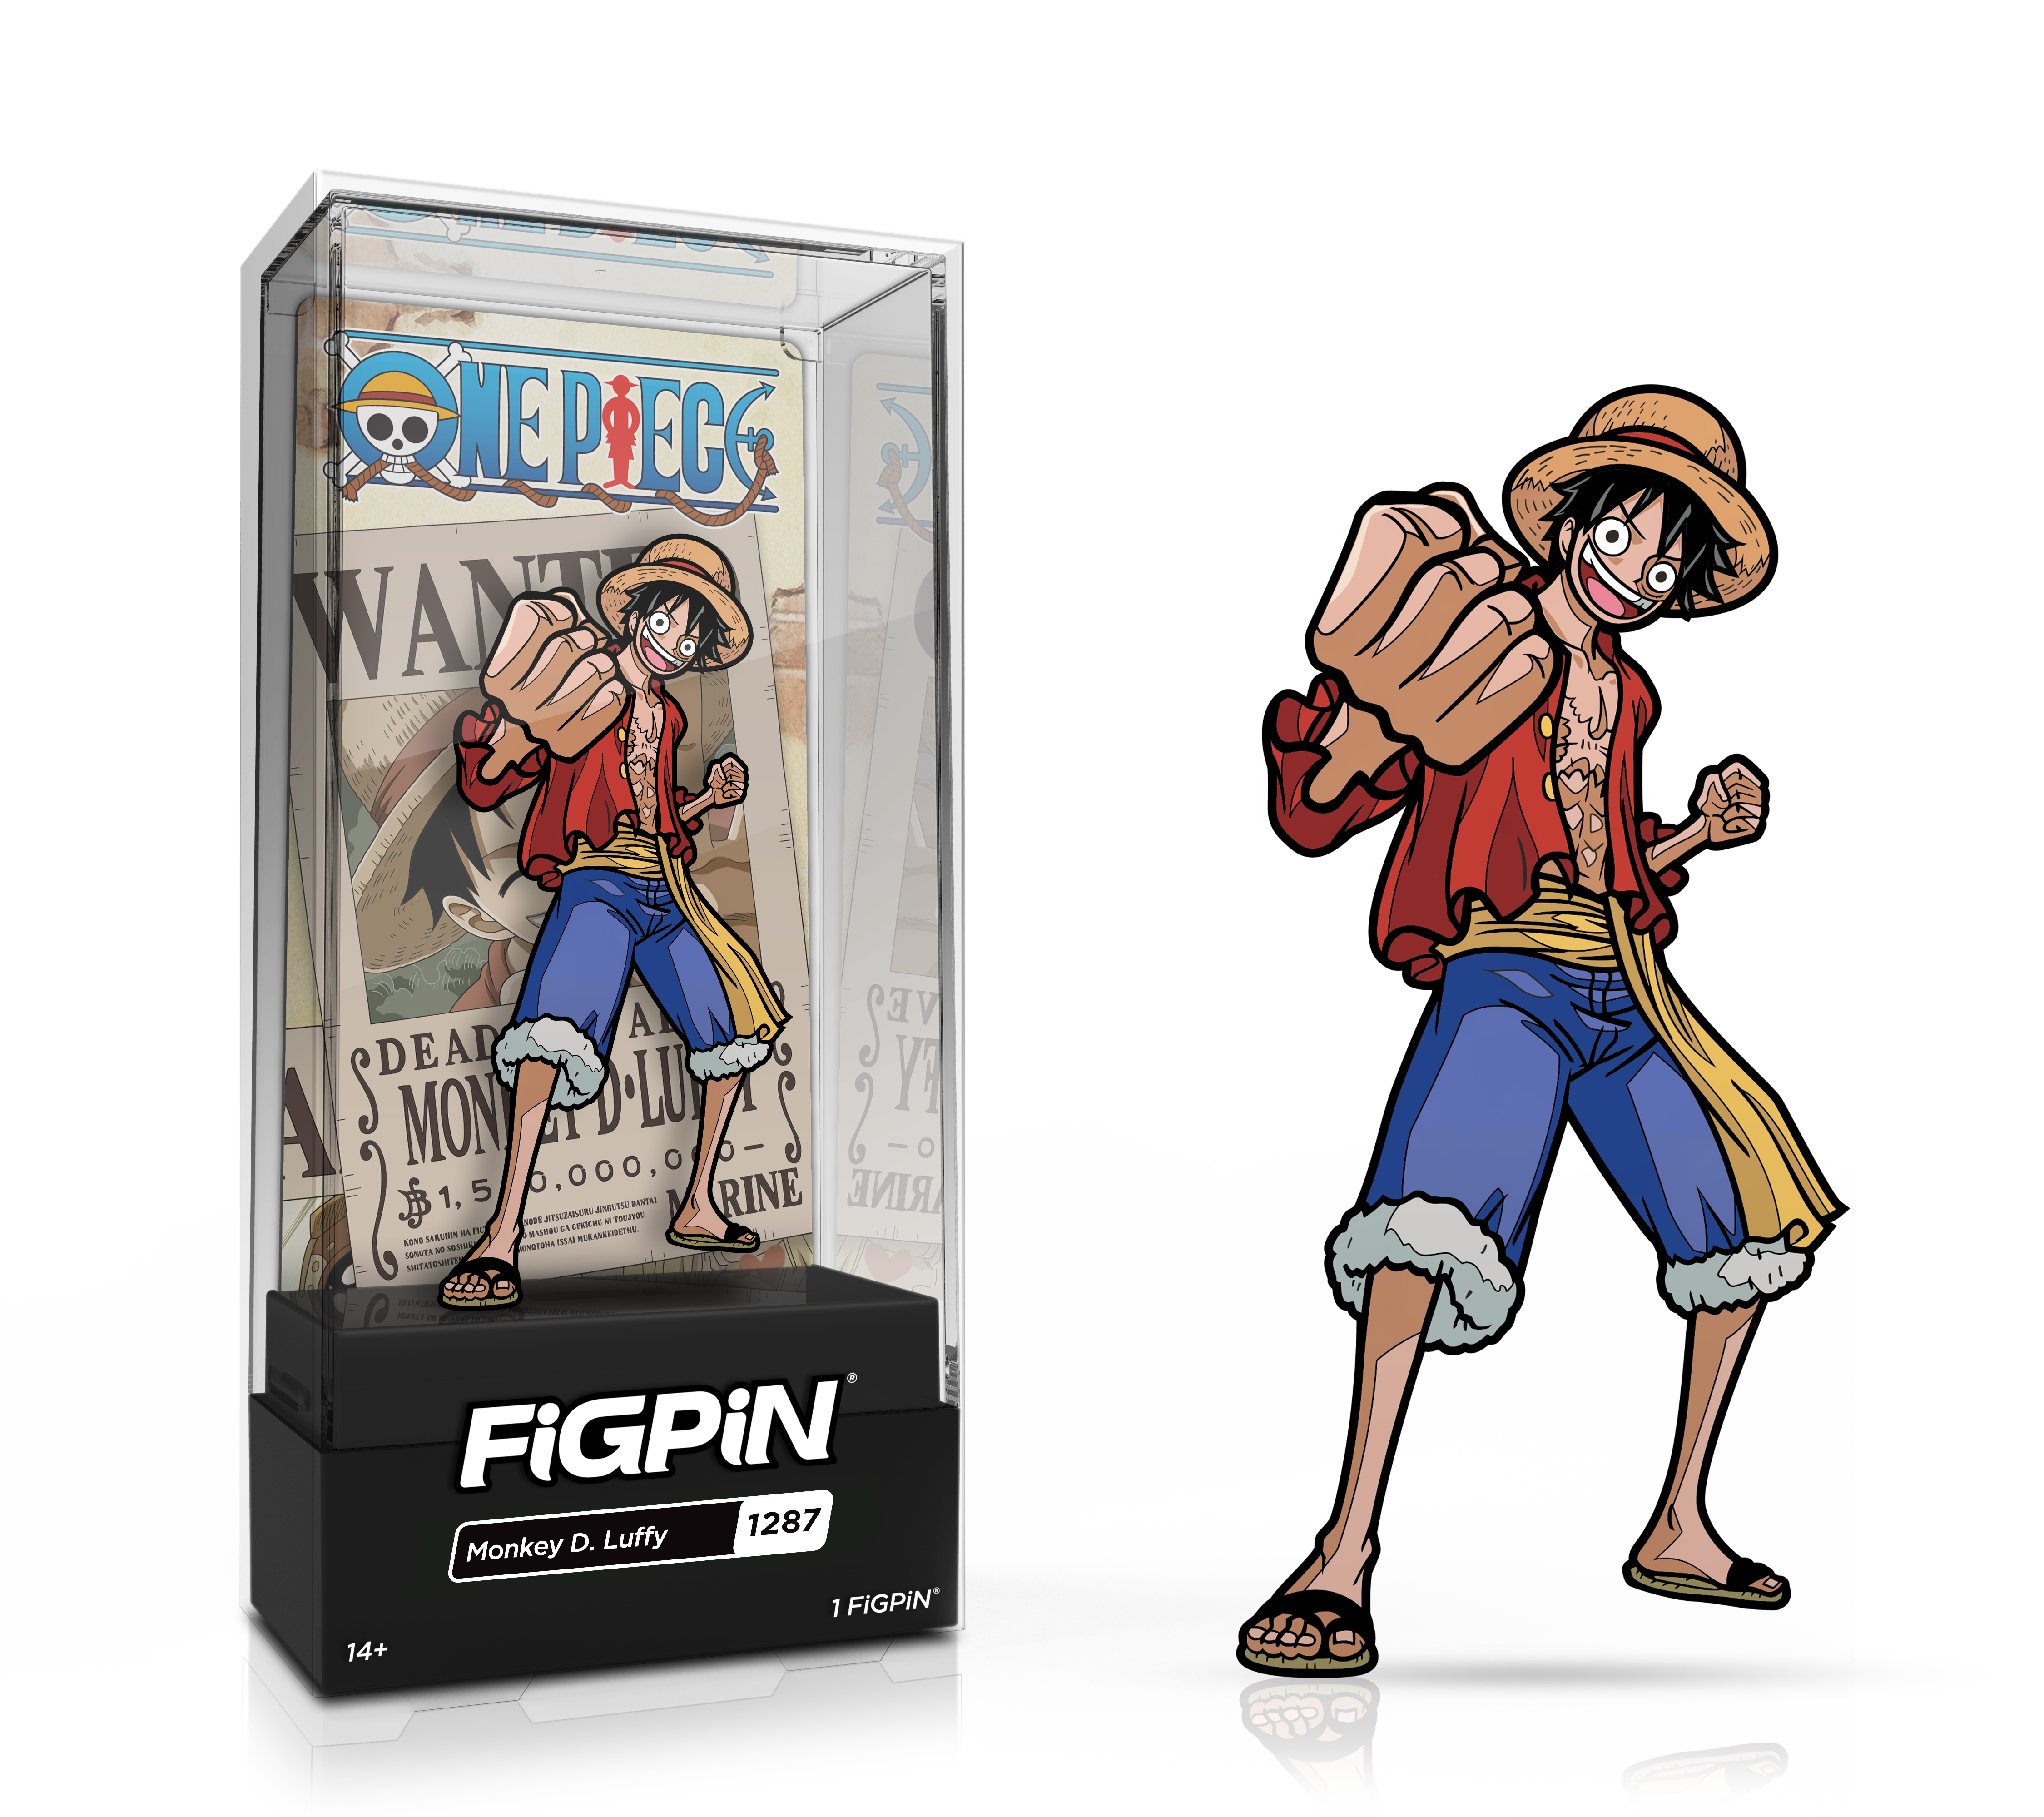 Side by side view of the Monkey D. Luffy enamel pin in display case and the art render.